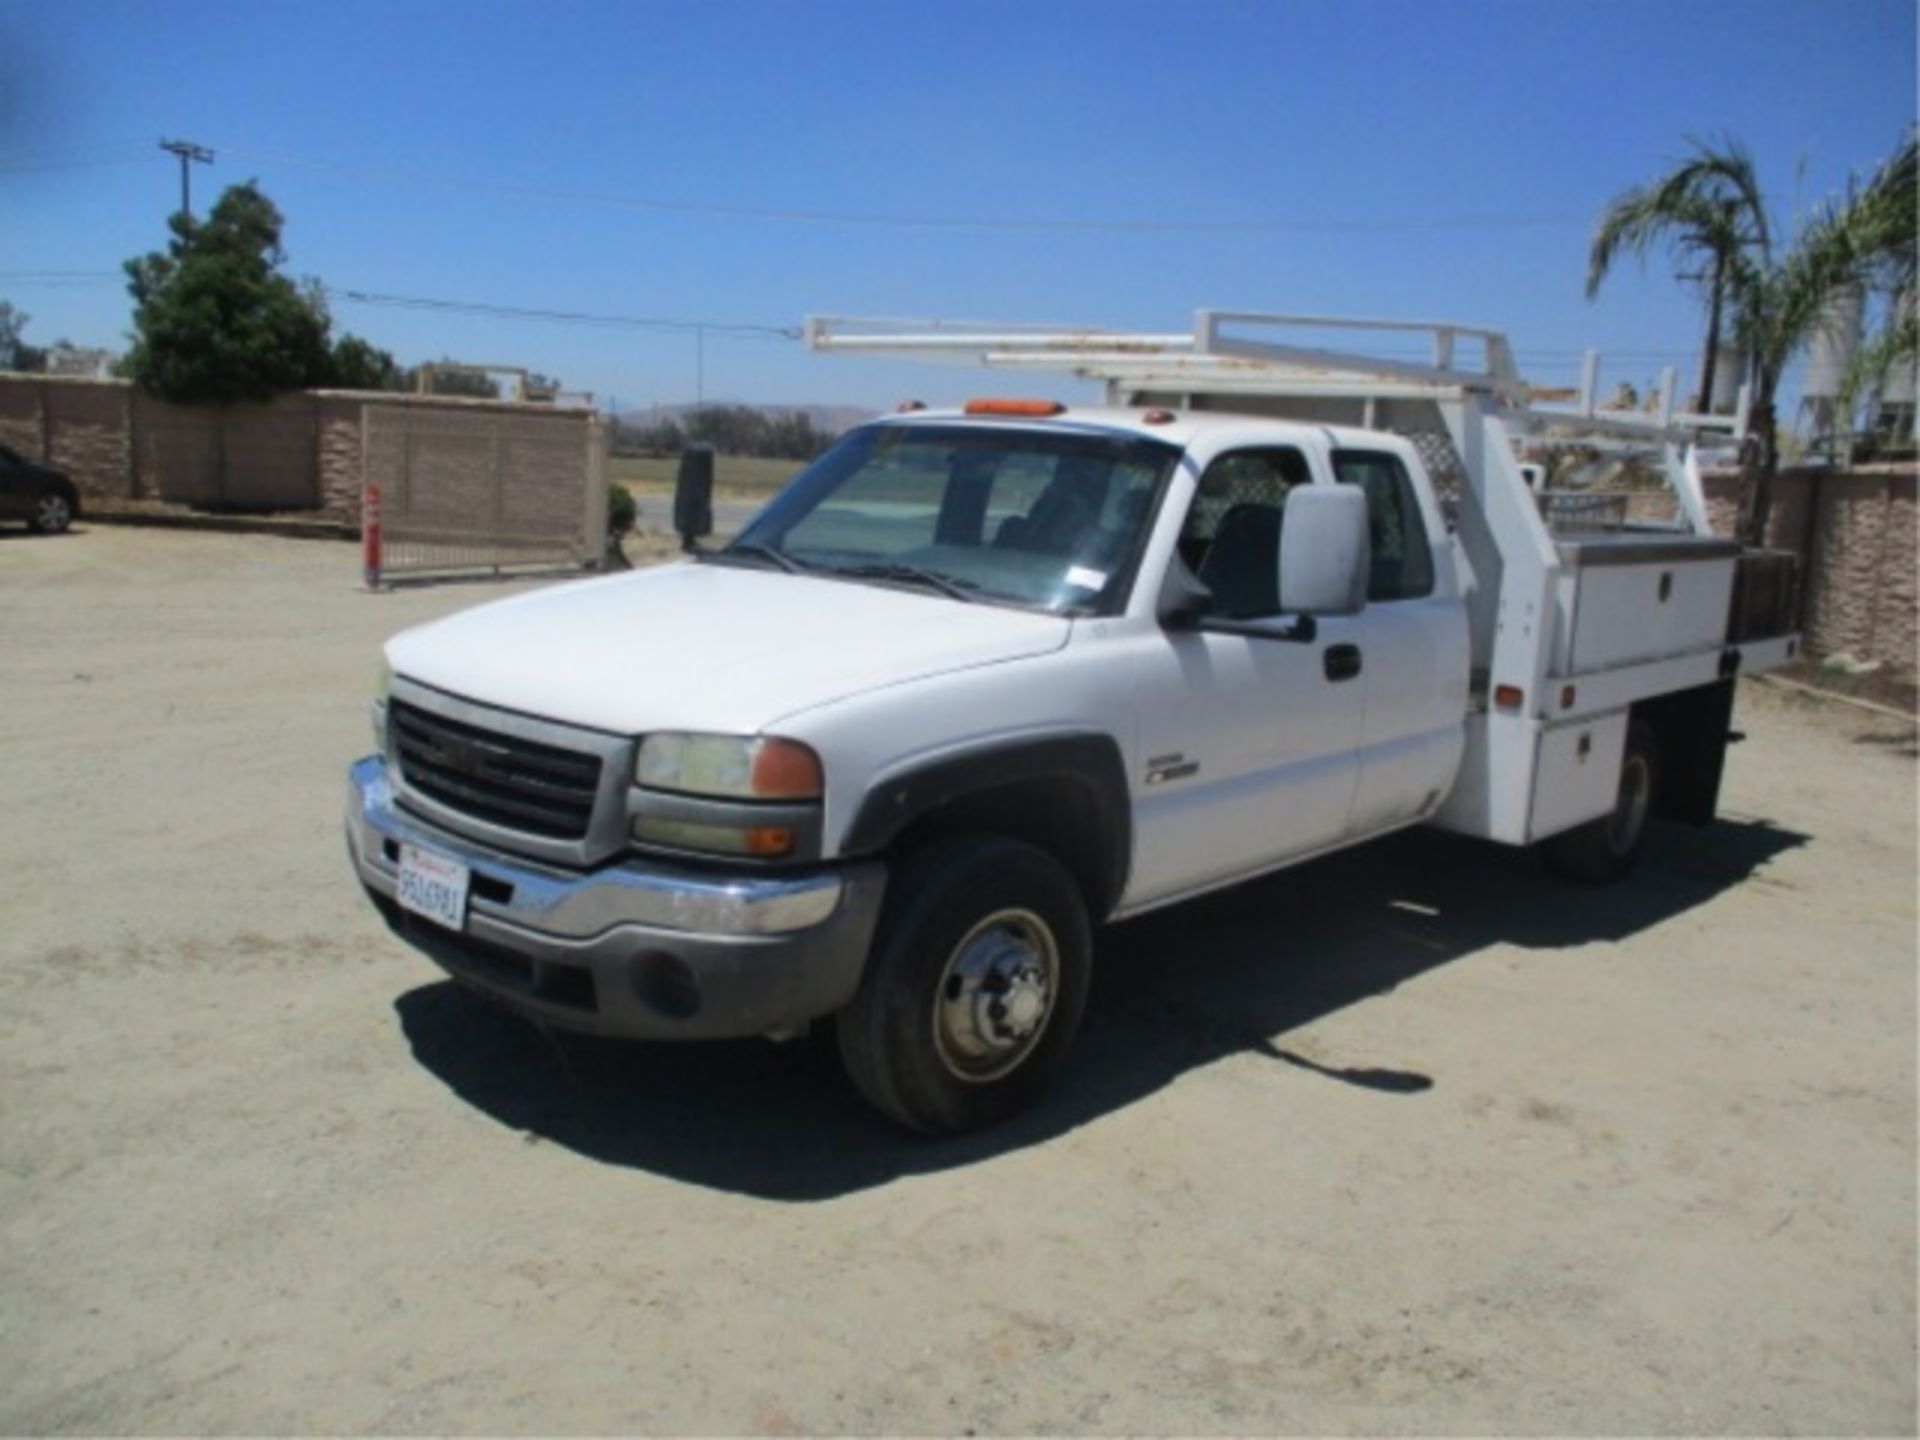 2006 Chevrolet 3500 Extended-Cab Utility Truck, 6.6L Turbo Diesel, Automatic, Tool Boxes, Lumber - Image 3 of 71